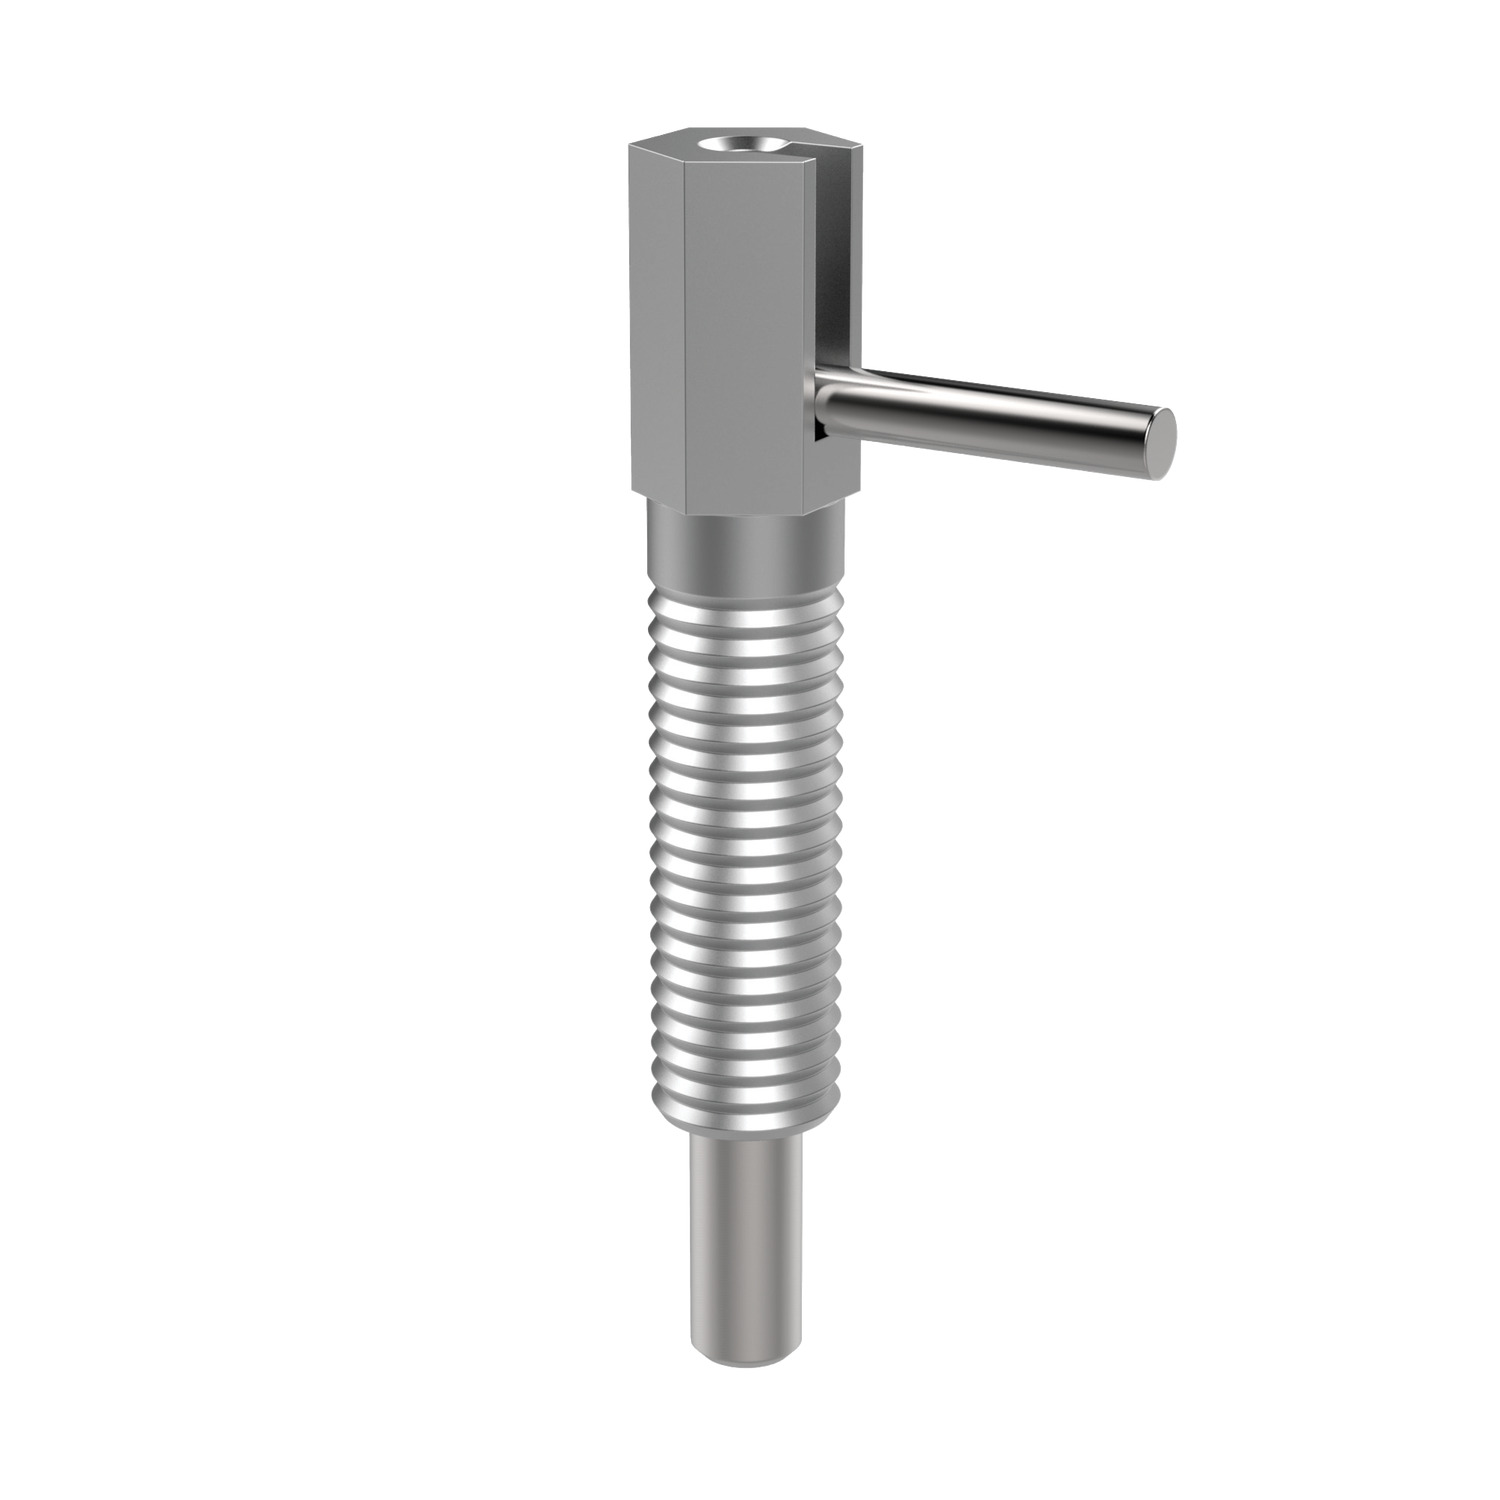 Index Plungers - Lever Grip Coarse thread, locking lever grip index plunger. Made from zinc plated steel and galvanised steel. Actuated via pulling back and turning lever 180°.